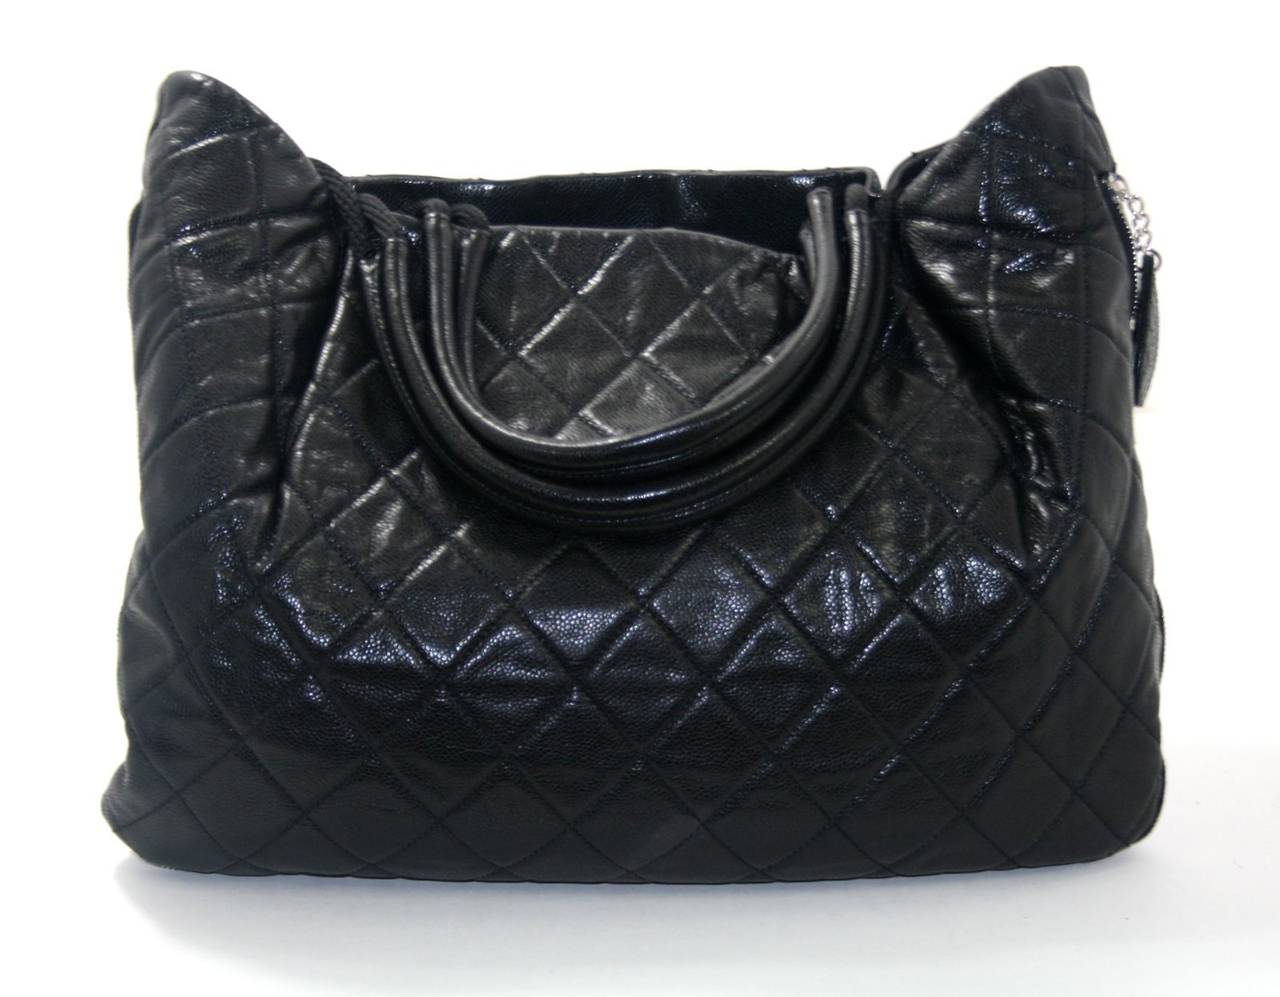 In better than excellent condition, this Black Caviar Expandable Zip Around Tote from Chanel’s 2010 Soho Edition Collection is a fabulous find.   The very roomy style is perfect for daily enjoyment or travel. 
Black durable caviar leather has a